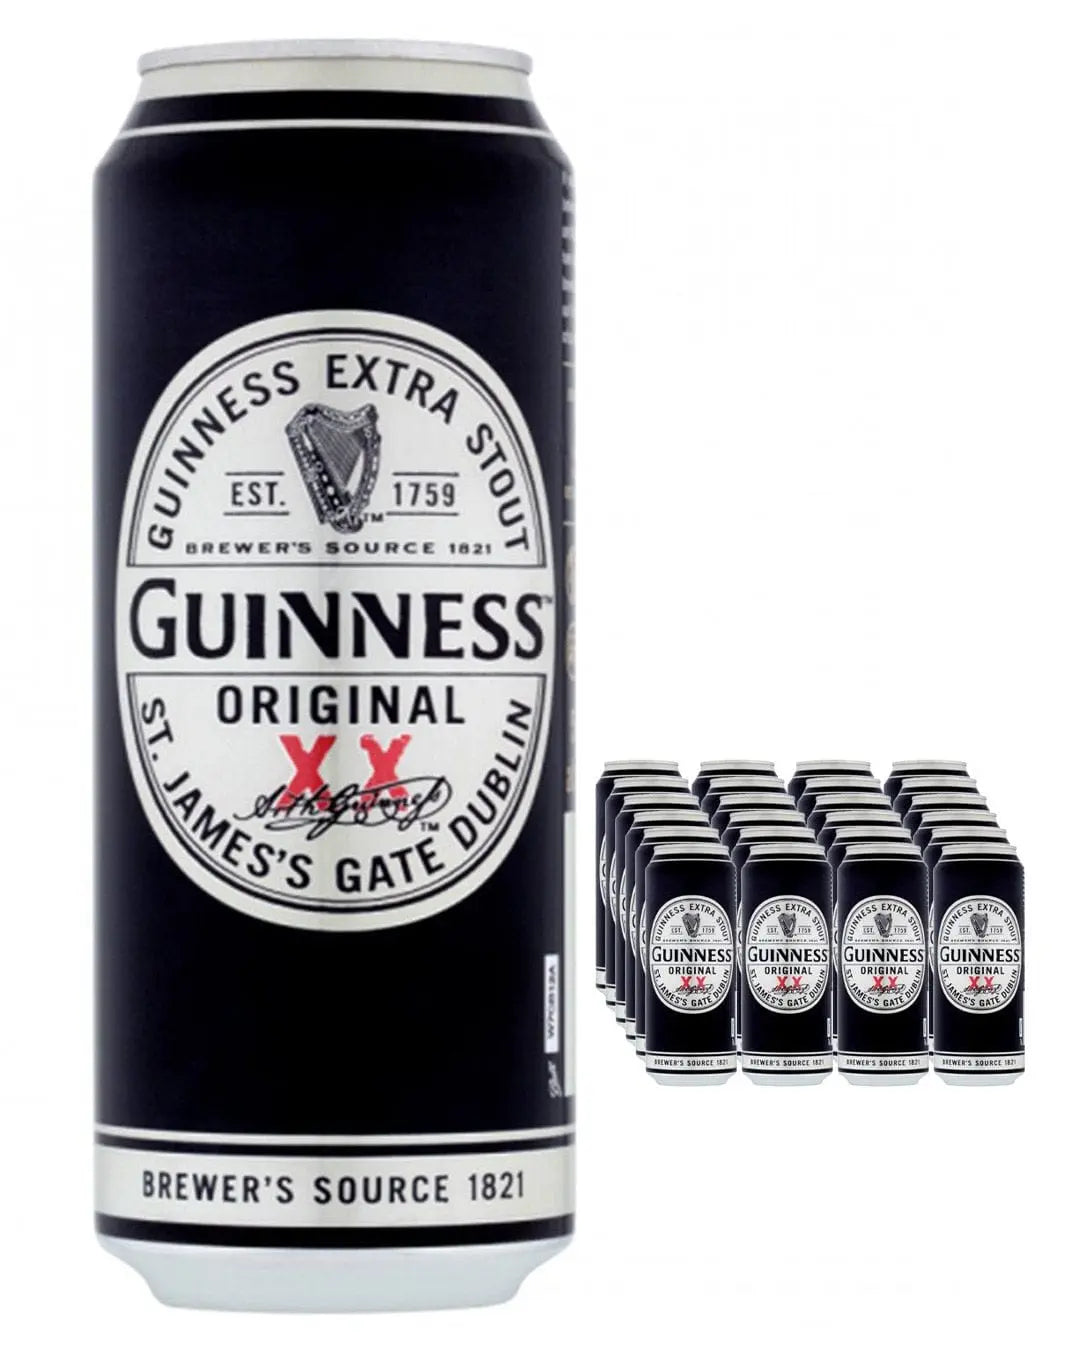 Guinness Original Extra Stout Cans Multipack, 24 x 500 ml Beer